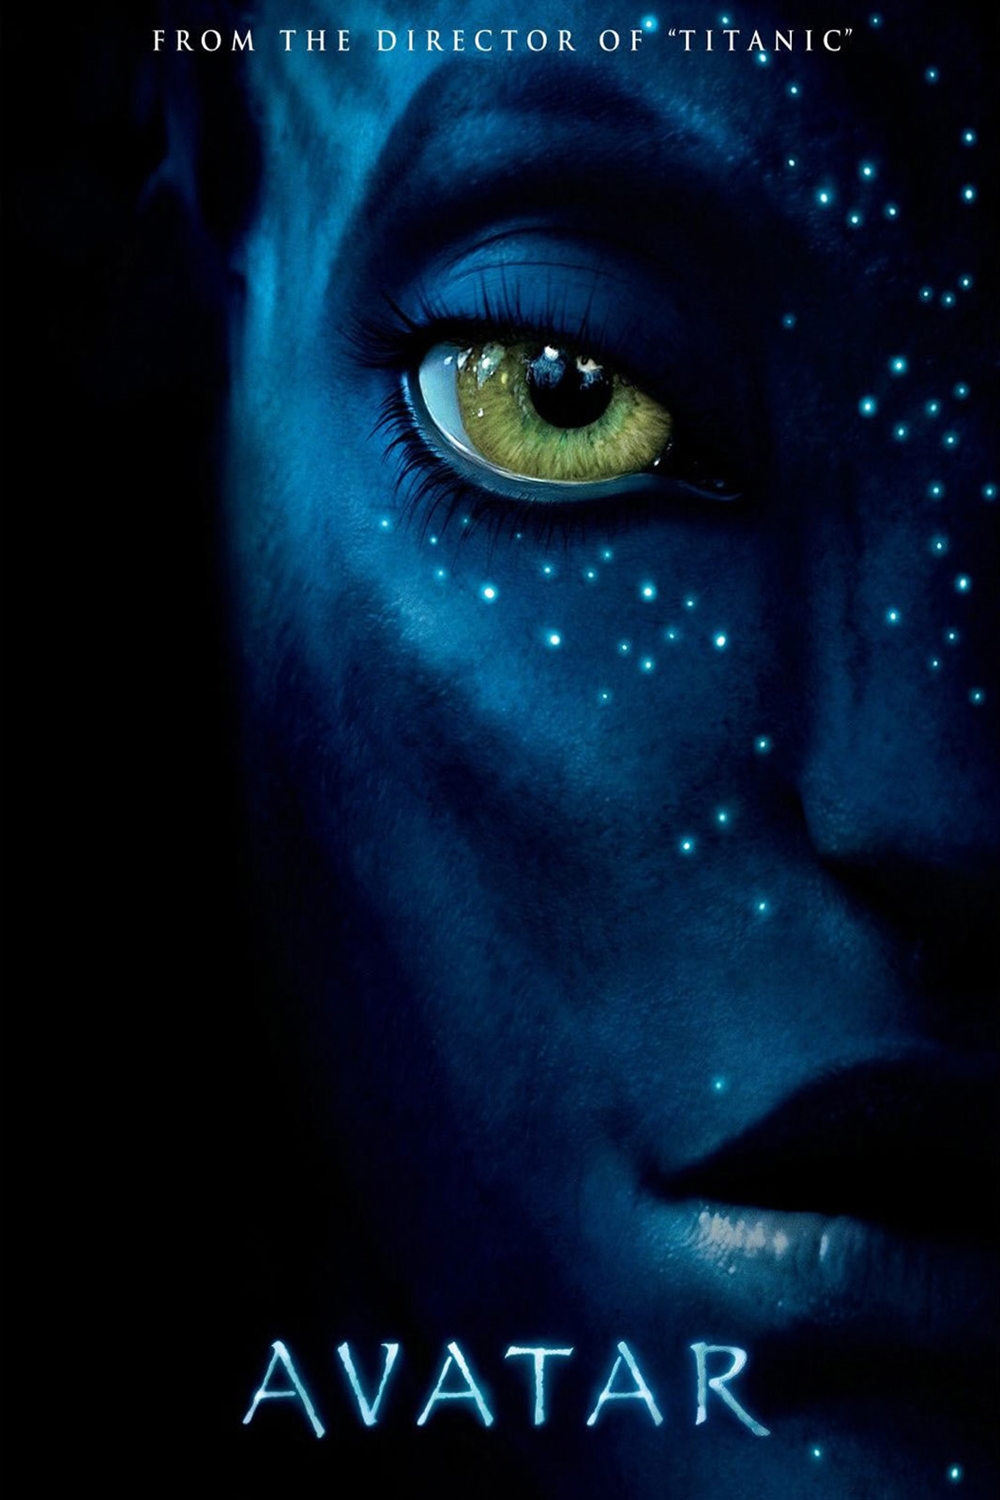 Poster of Avatar